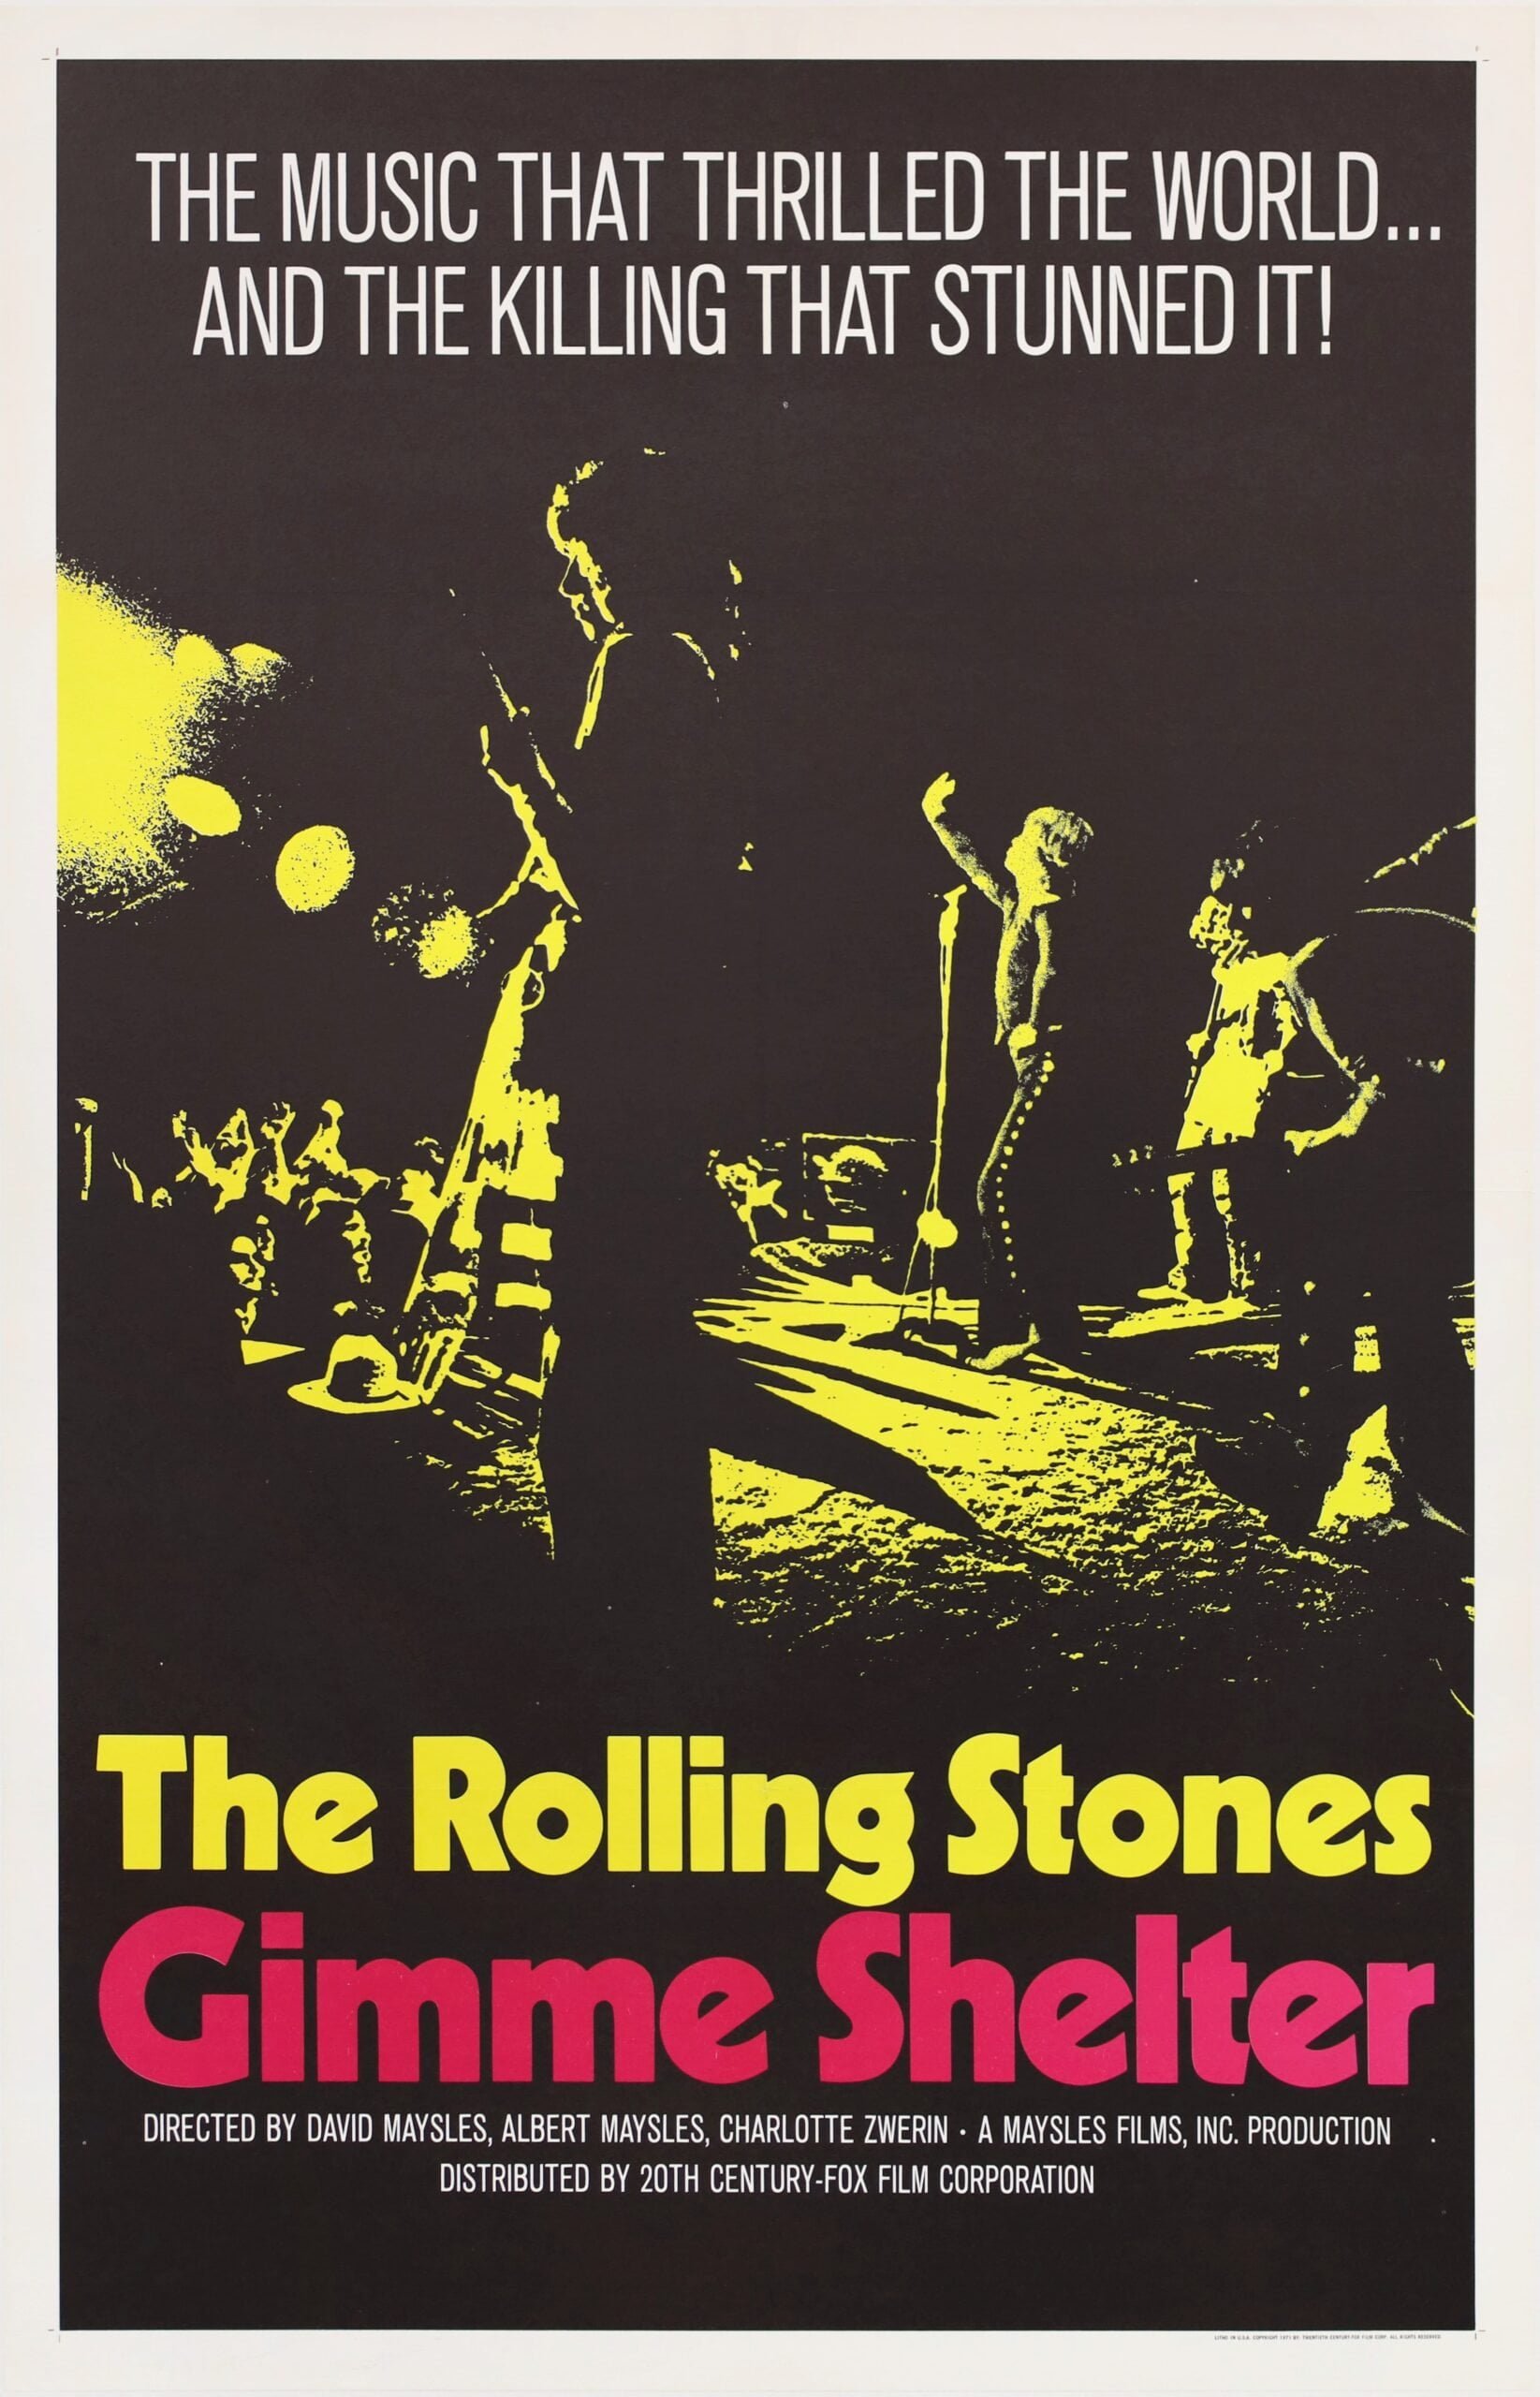 Original vintage cinema movie poster for the Rolling Stones tour documentary, Gimme Shelter